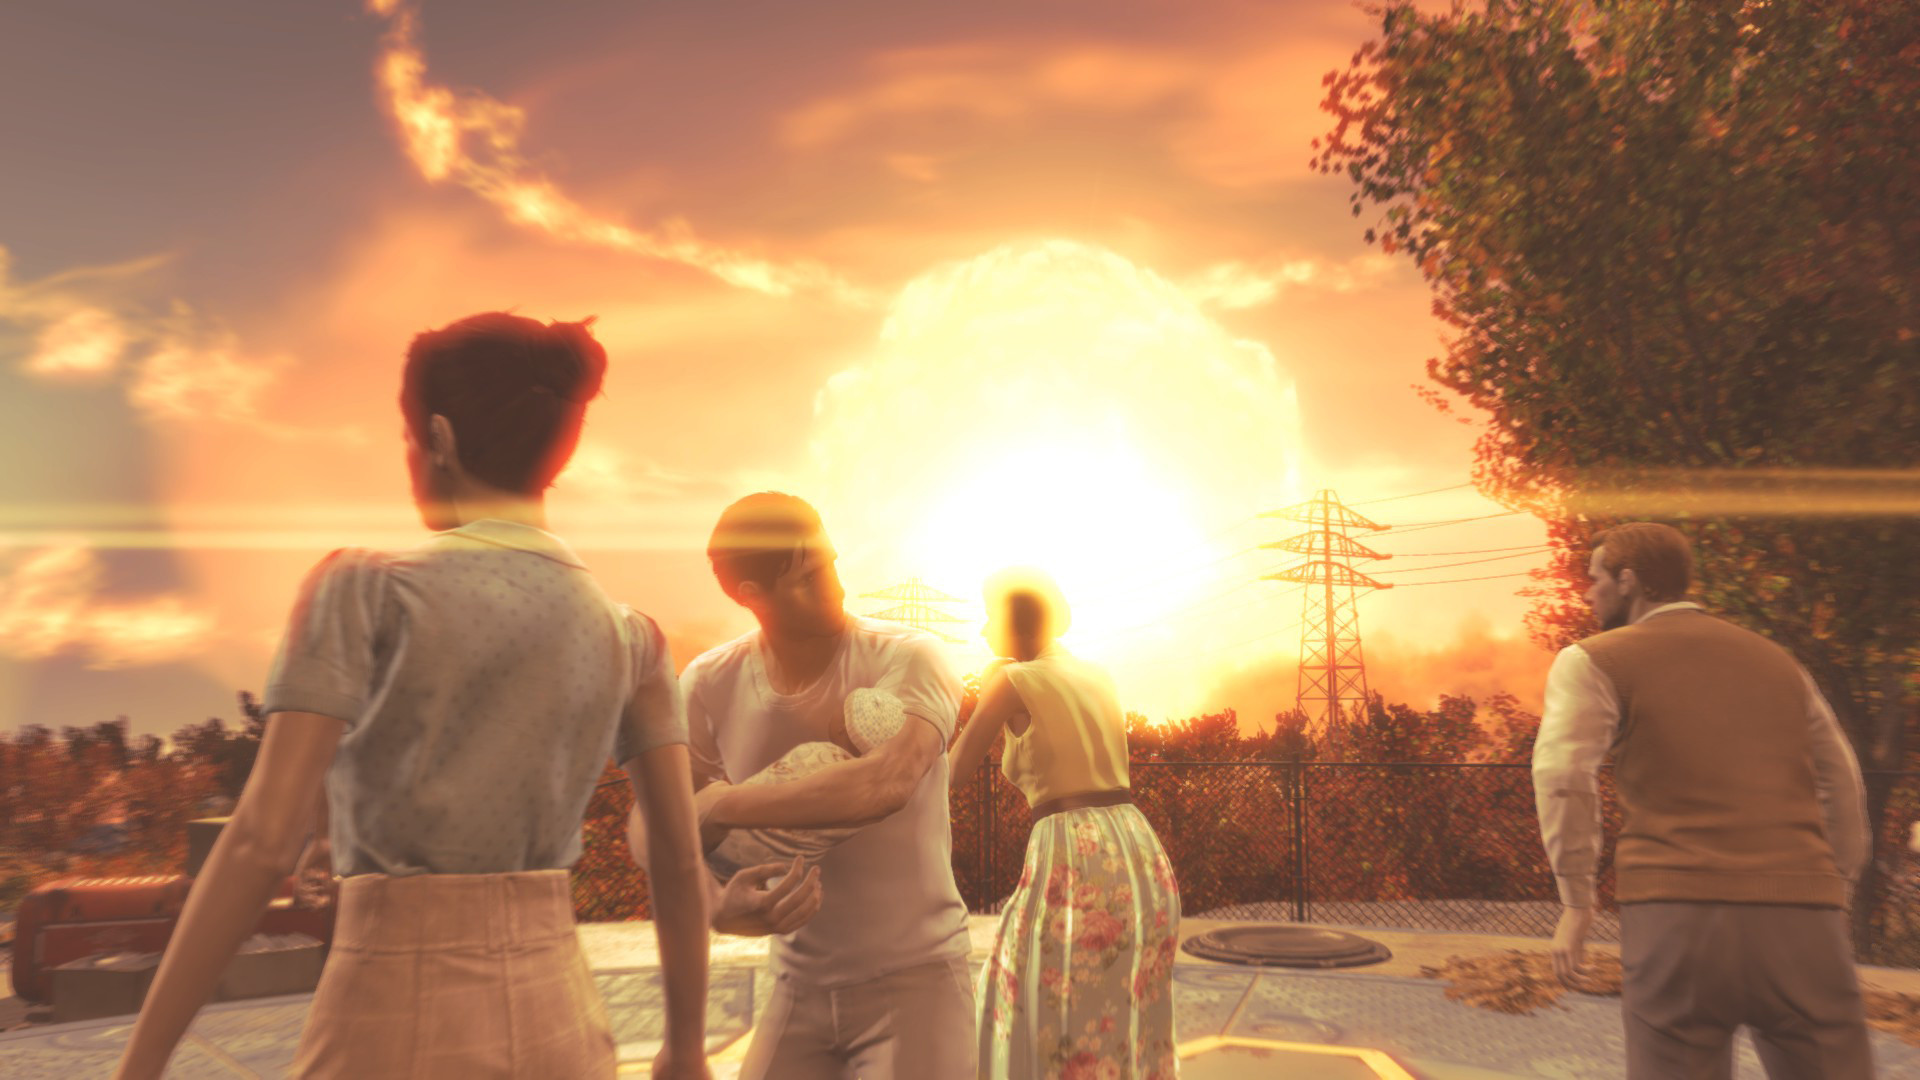 1920x1080 Fallout 4 HD Wallpaper Nuclear Explosion